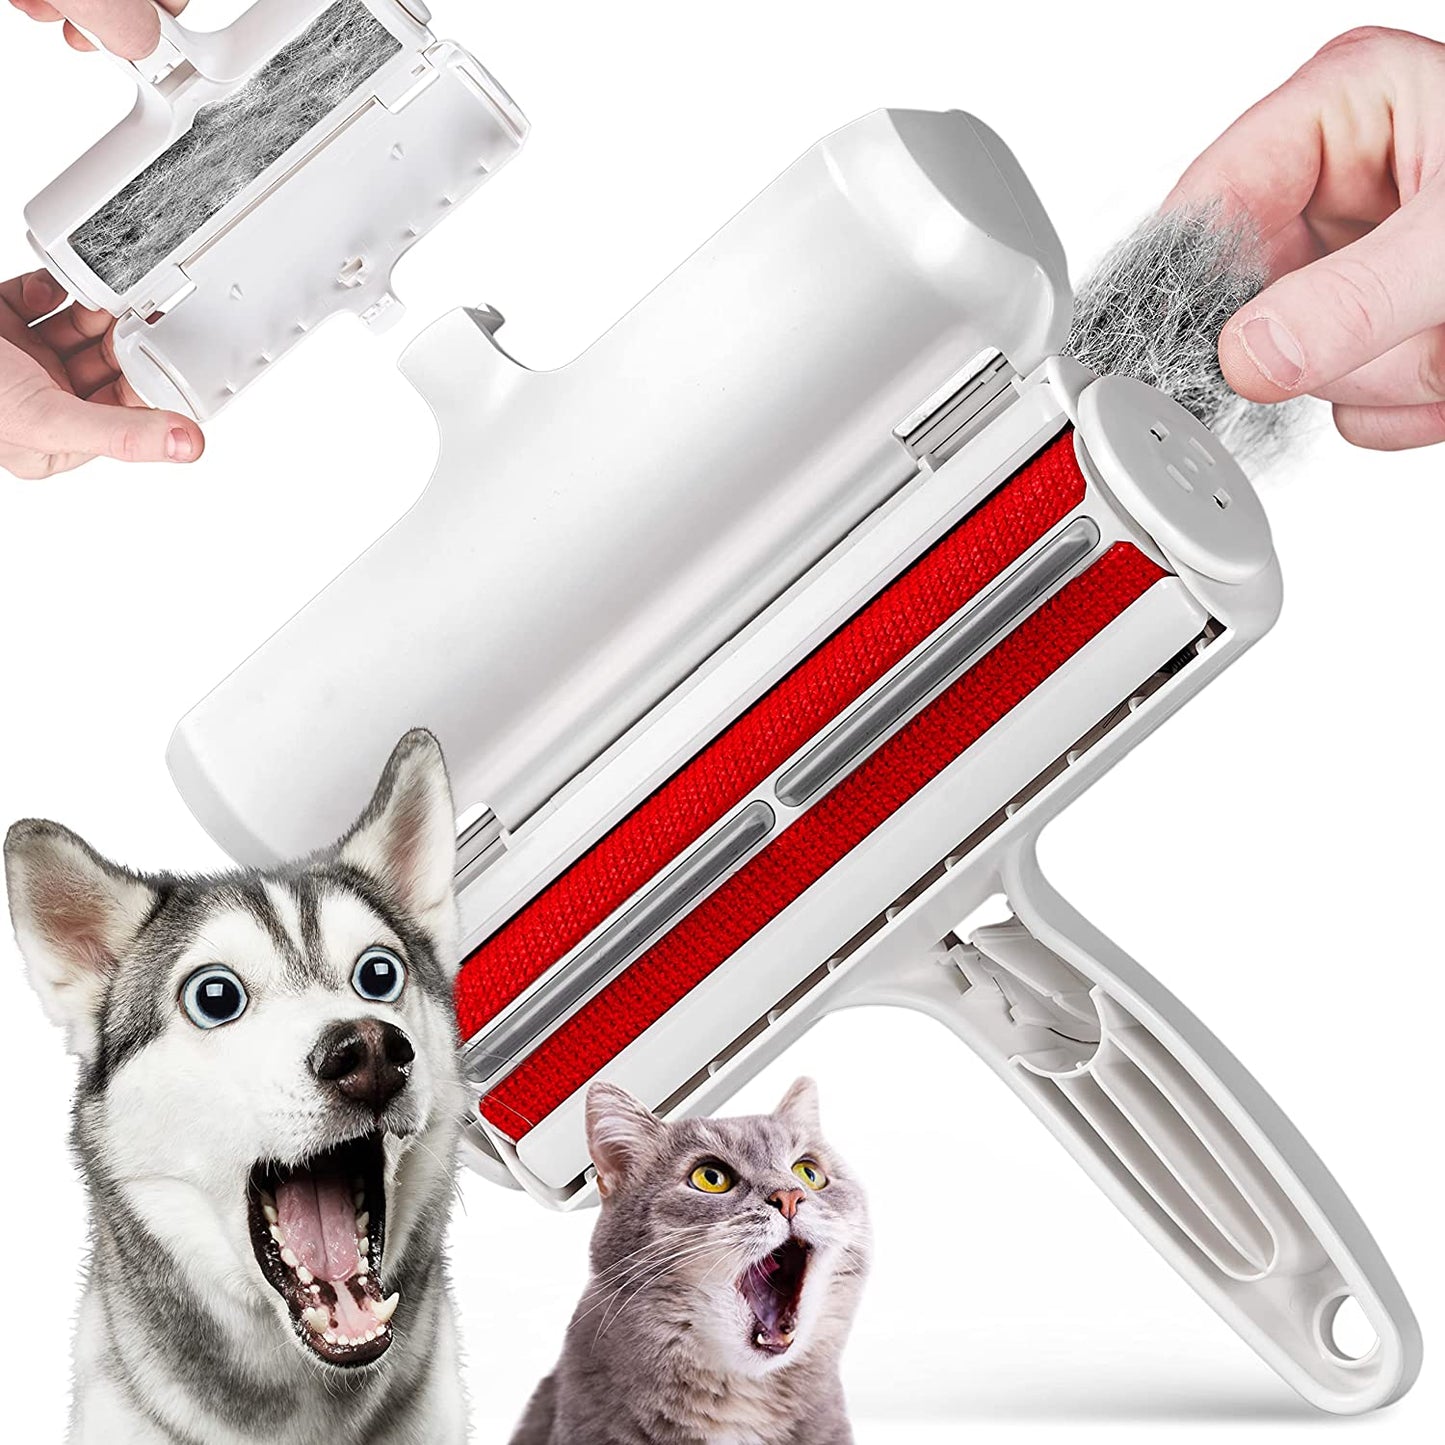 InstaRoller - Removes Pet Hairs Instantly